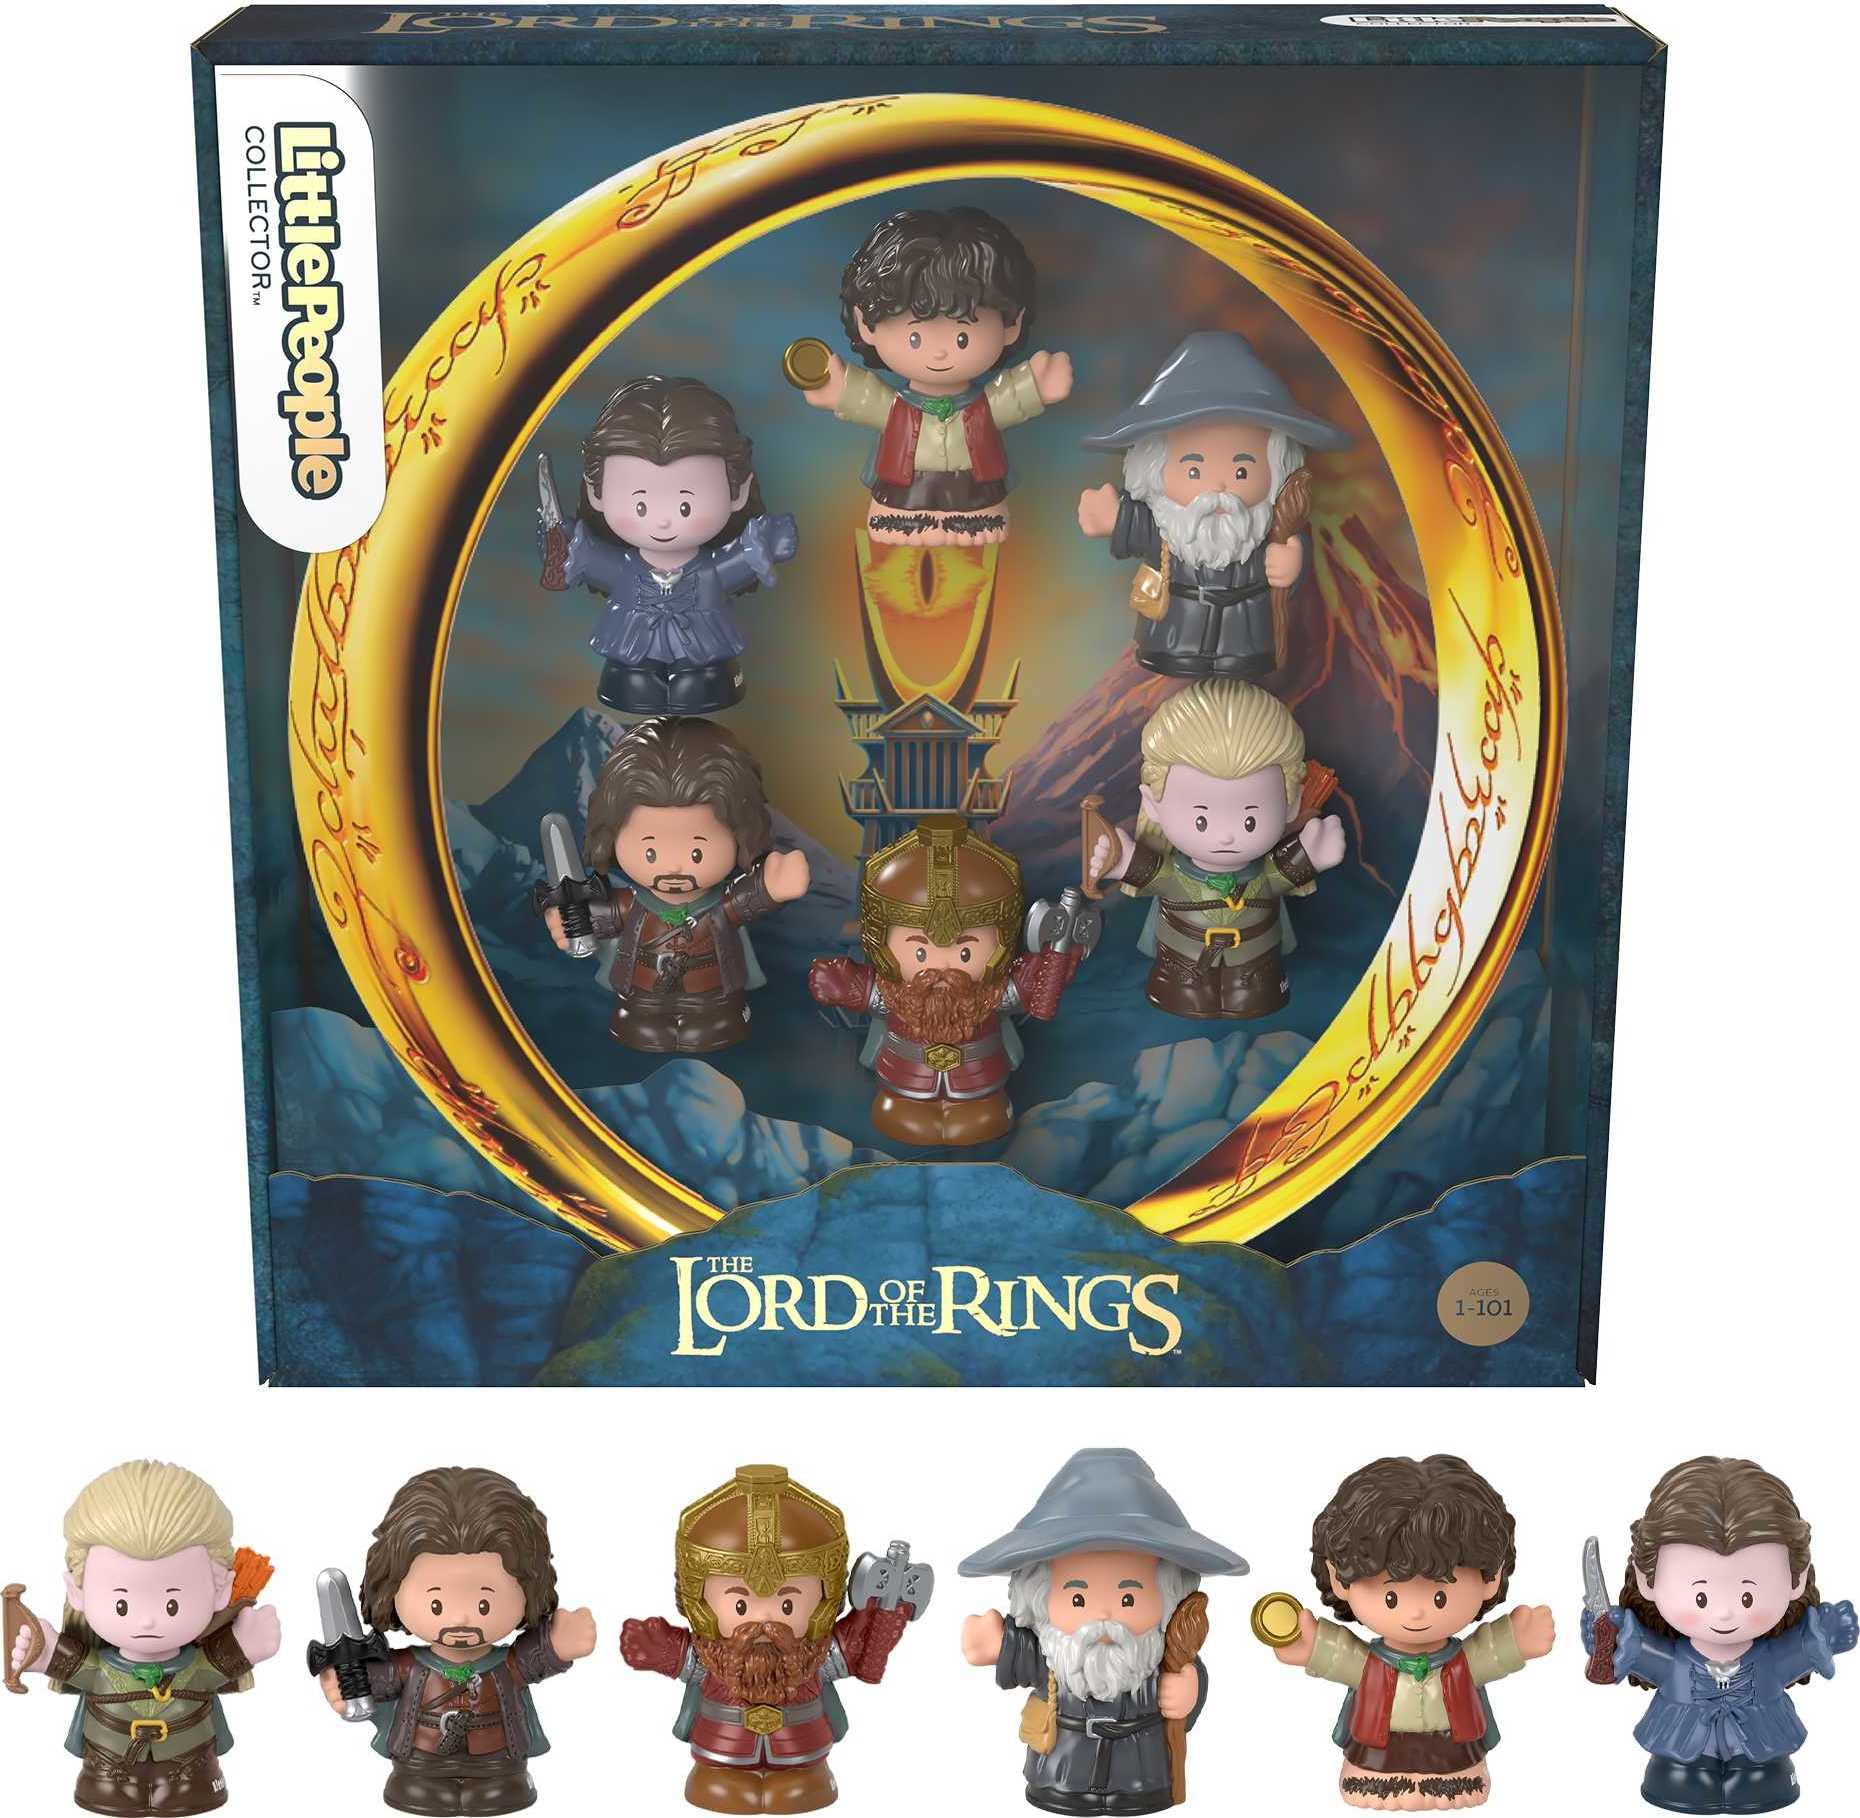 Little People Collector Lord of the Rings Special Edition Figure Set with 6 Characters in a Display Gift Package for Adults & Fans (Amazon Exclusive)